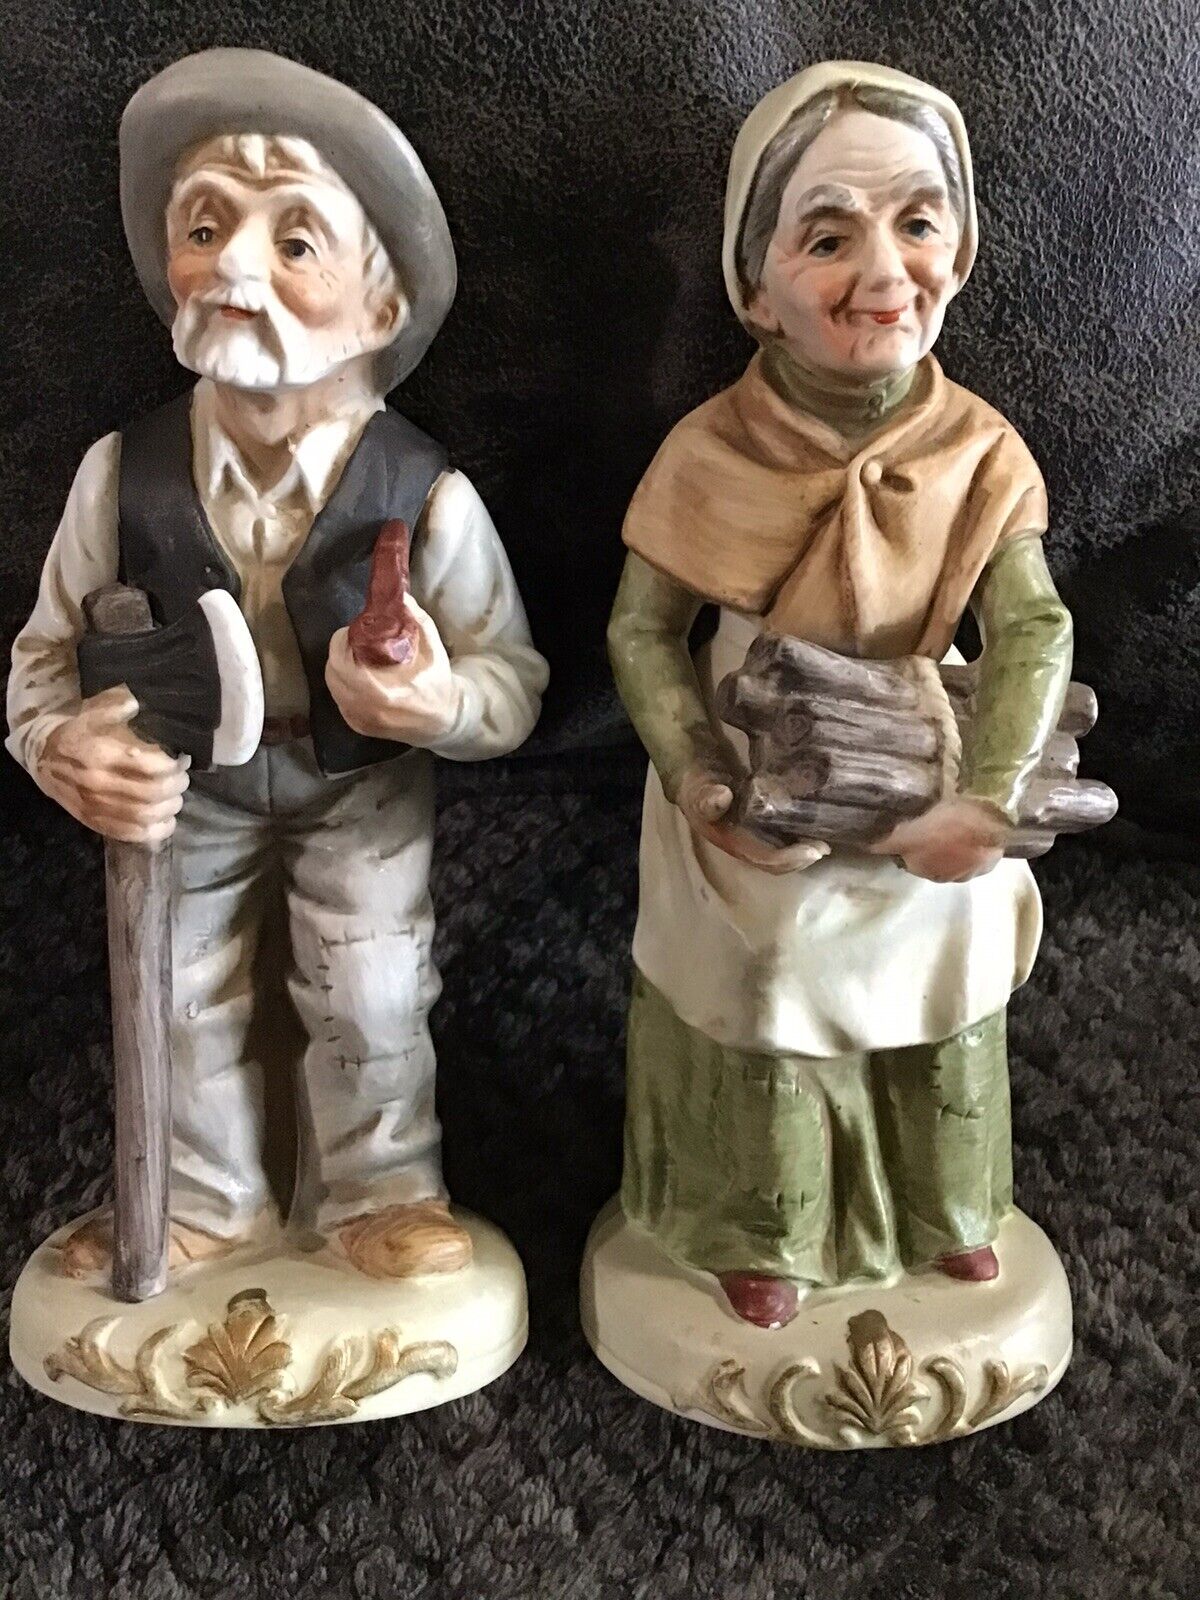 2 pc. Home Interior HOMCO Old Man and Woman Collection Porcelain Figurines